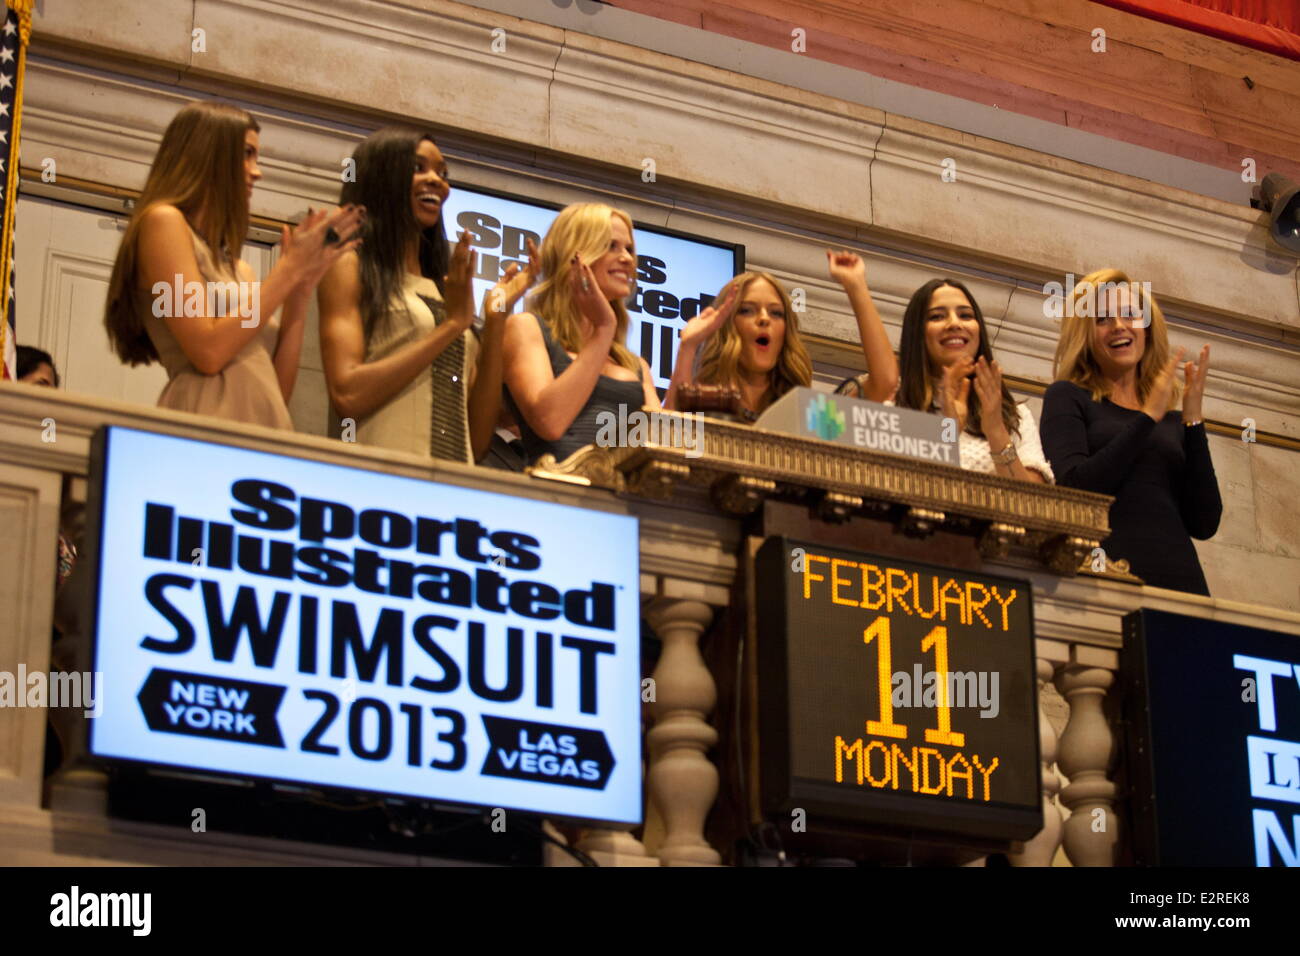 Sports Illustrated swimsuit models celebrate the launch of the 2013 Swimsuit Franchise at the New York Stock Exchange (NYSE) by ringing the closing bell  Featuring: Julie Henderson,Adaora Cobb,Kate Bock,Natasha Barnard,Anne V,Jessica Gomes,Jessica Perez W Stock Photo